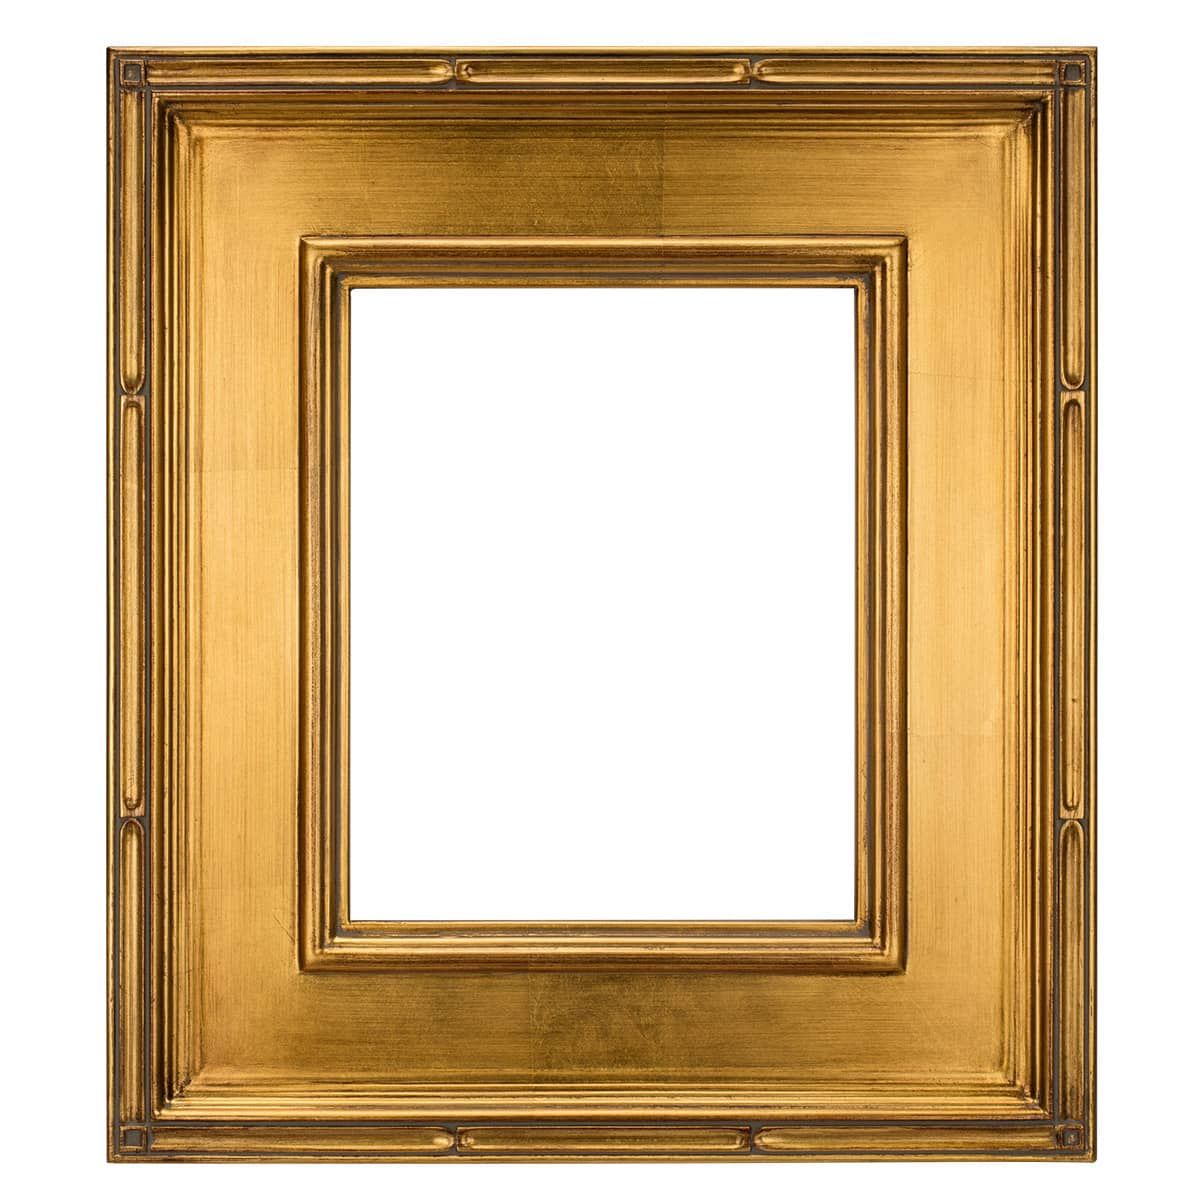 Museum Plein Aire Frame - Gold, 30 x 40